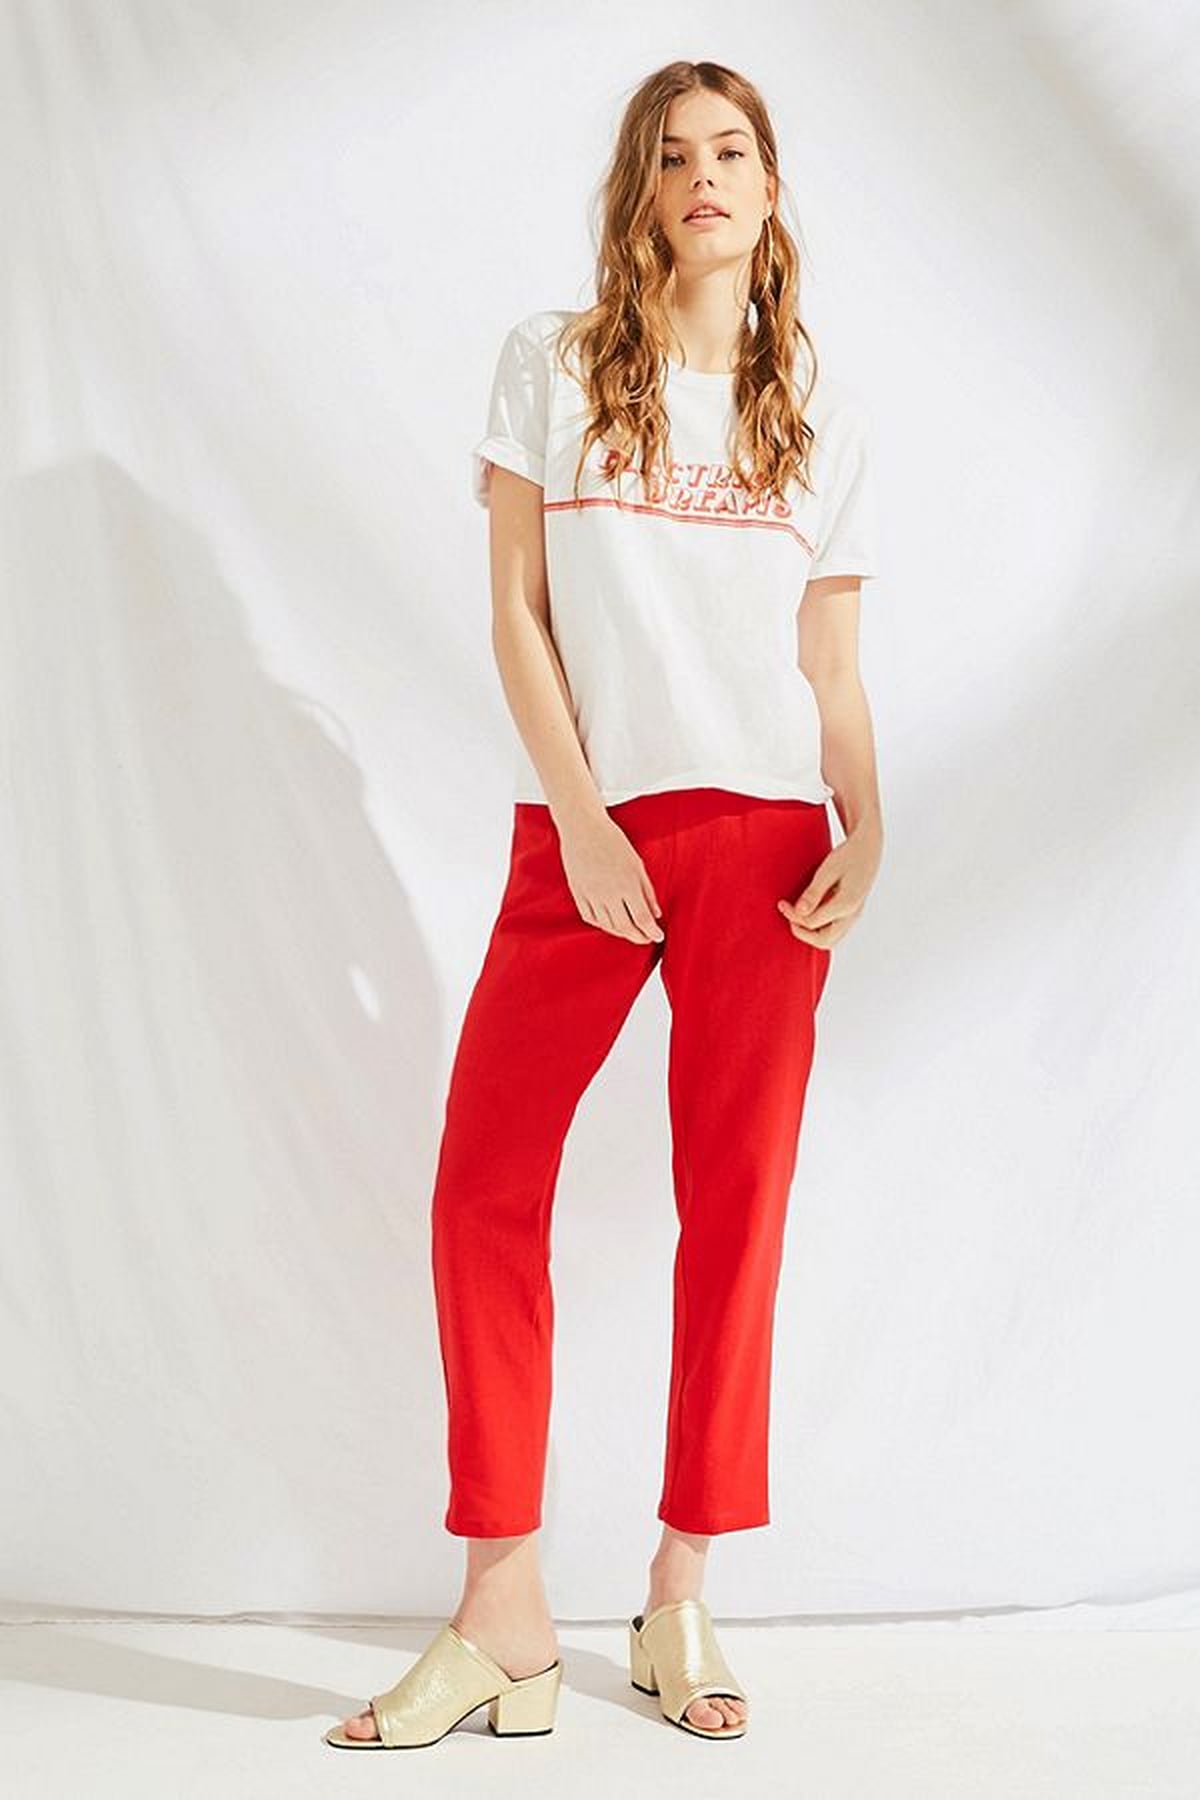 Best Pants From Urban Outfitters | POPSUGAR Fashion